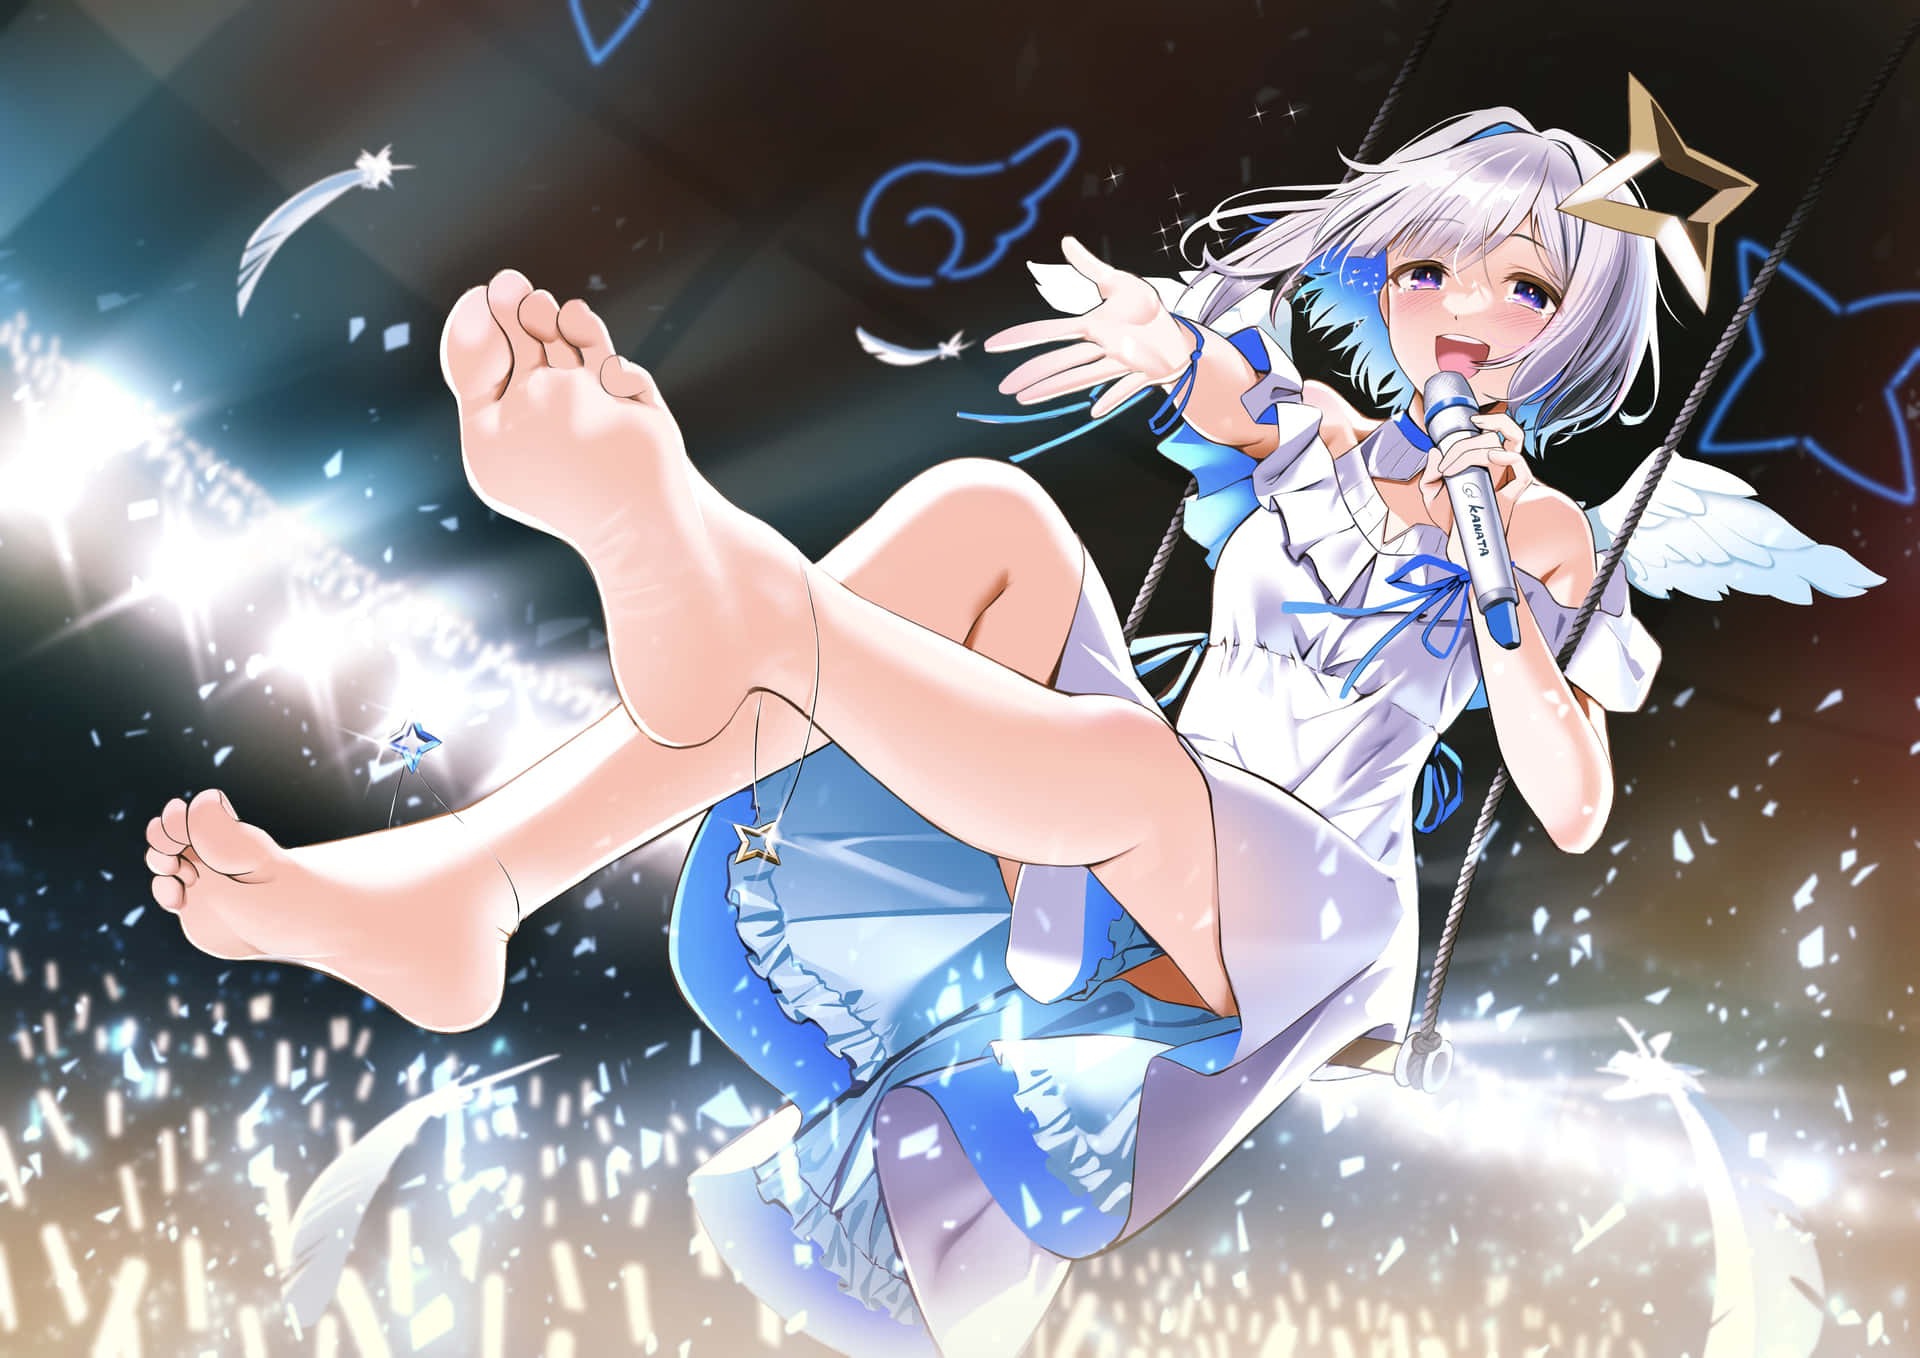 Angelic Girl Showcasing Her Stiletto-clad Sole Against a Heavenly Backdrop Wallpaper